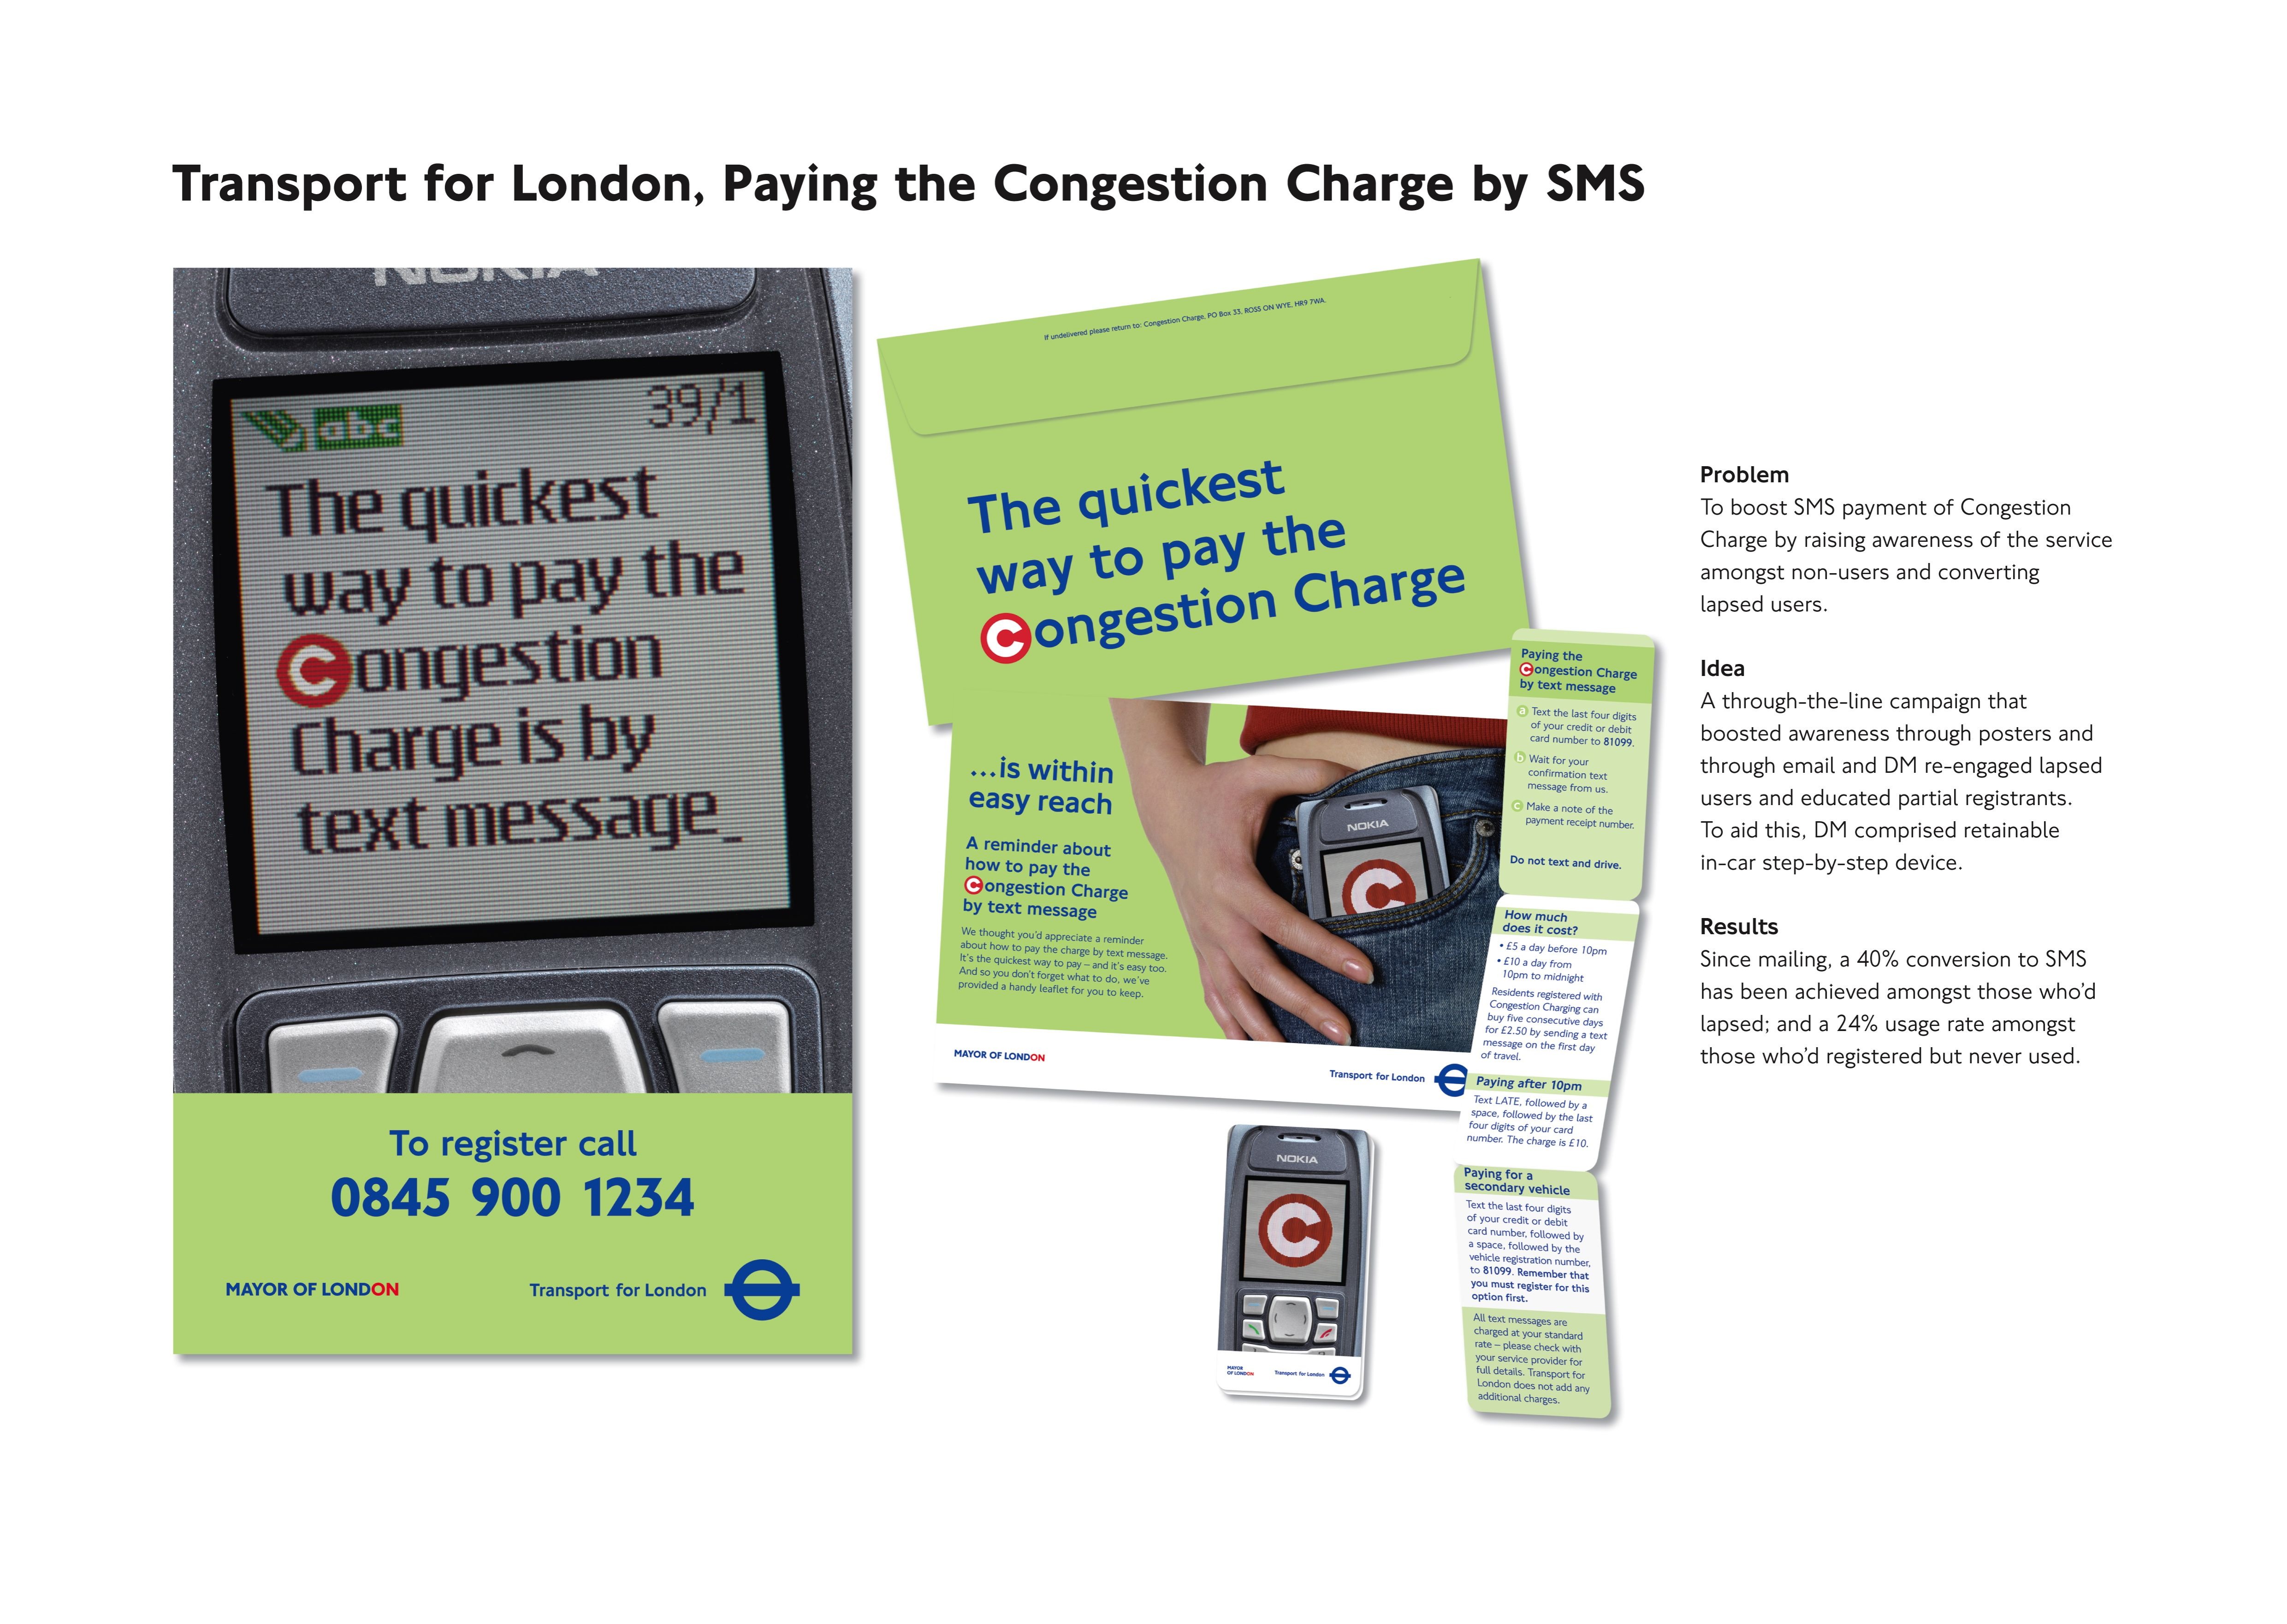 CONGESTION CHARGE PAYMENT